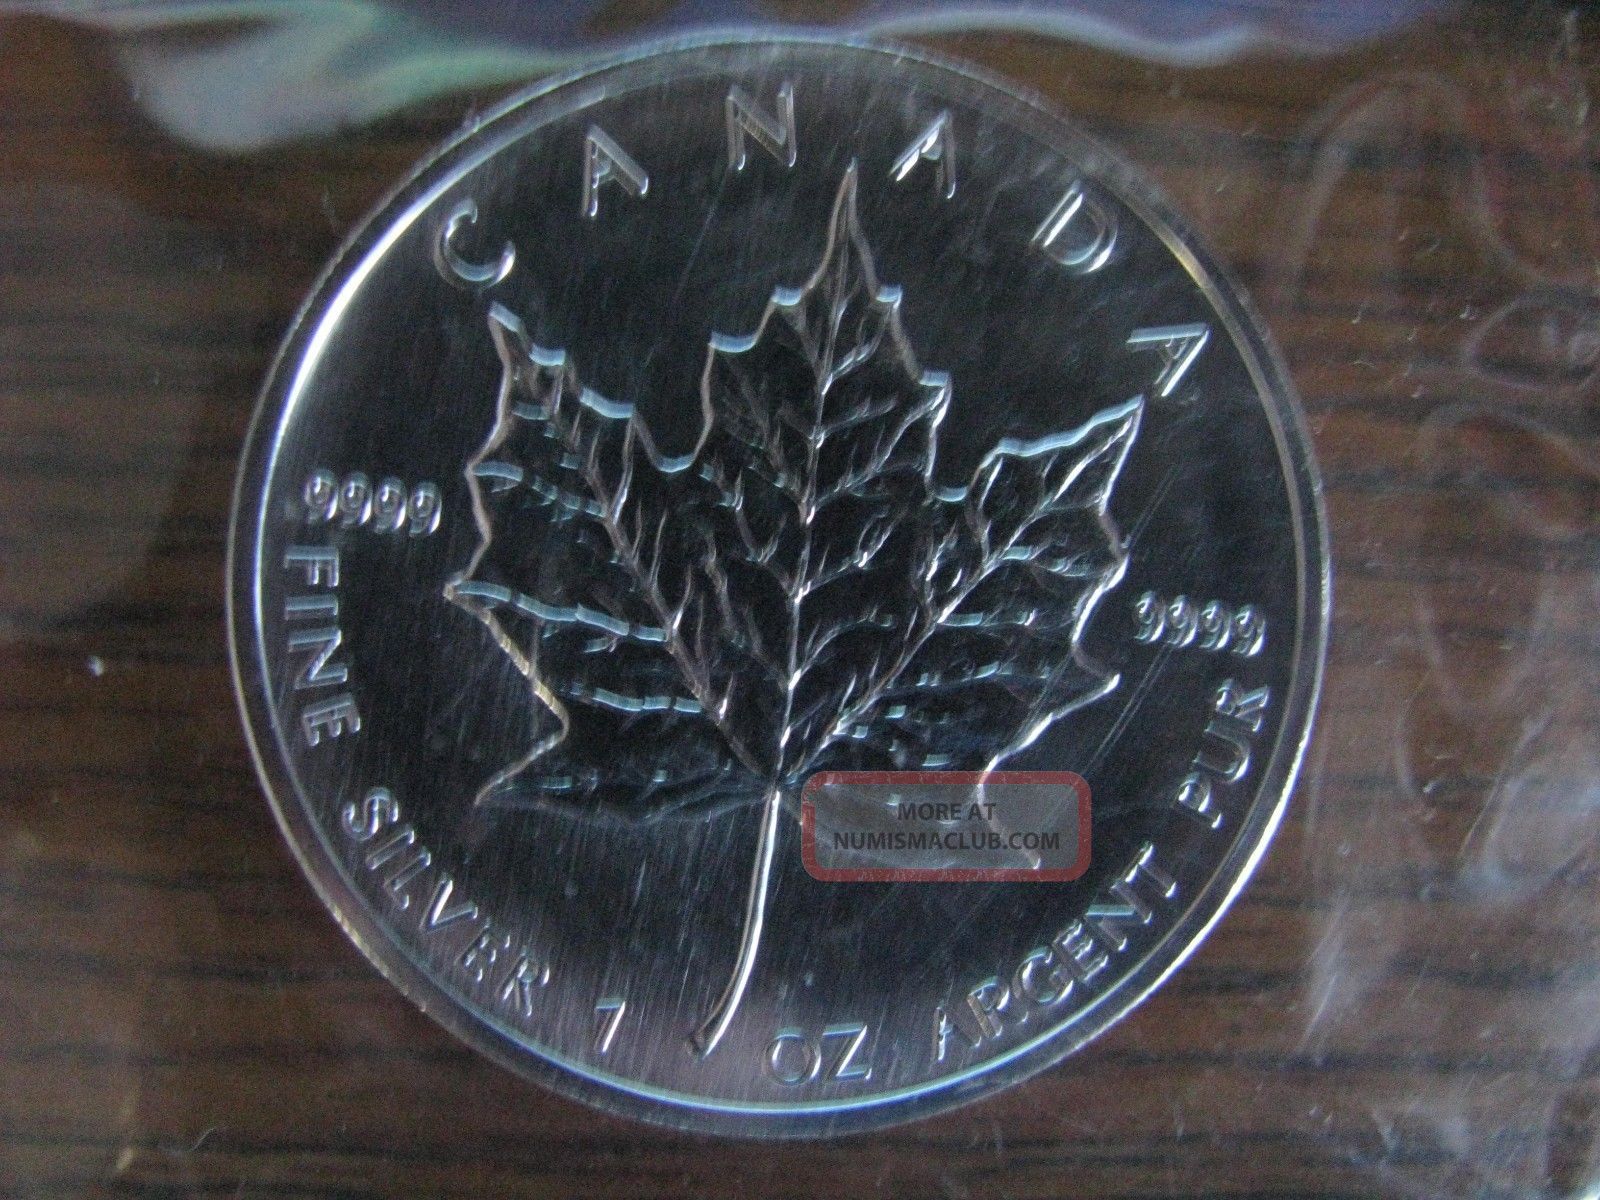 1 oz silver maple leaf coin value